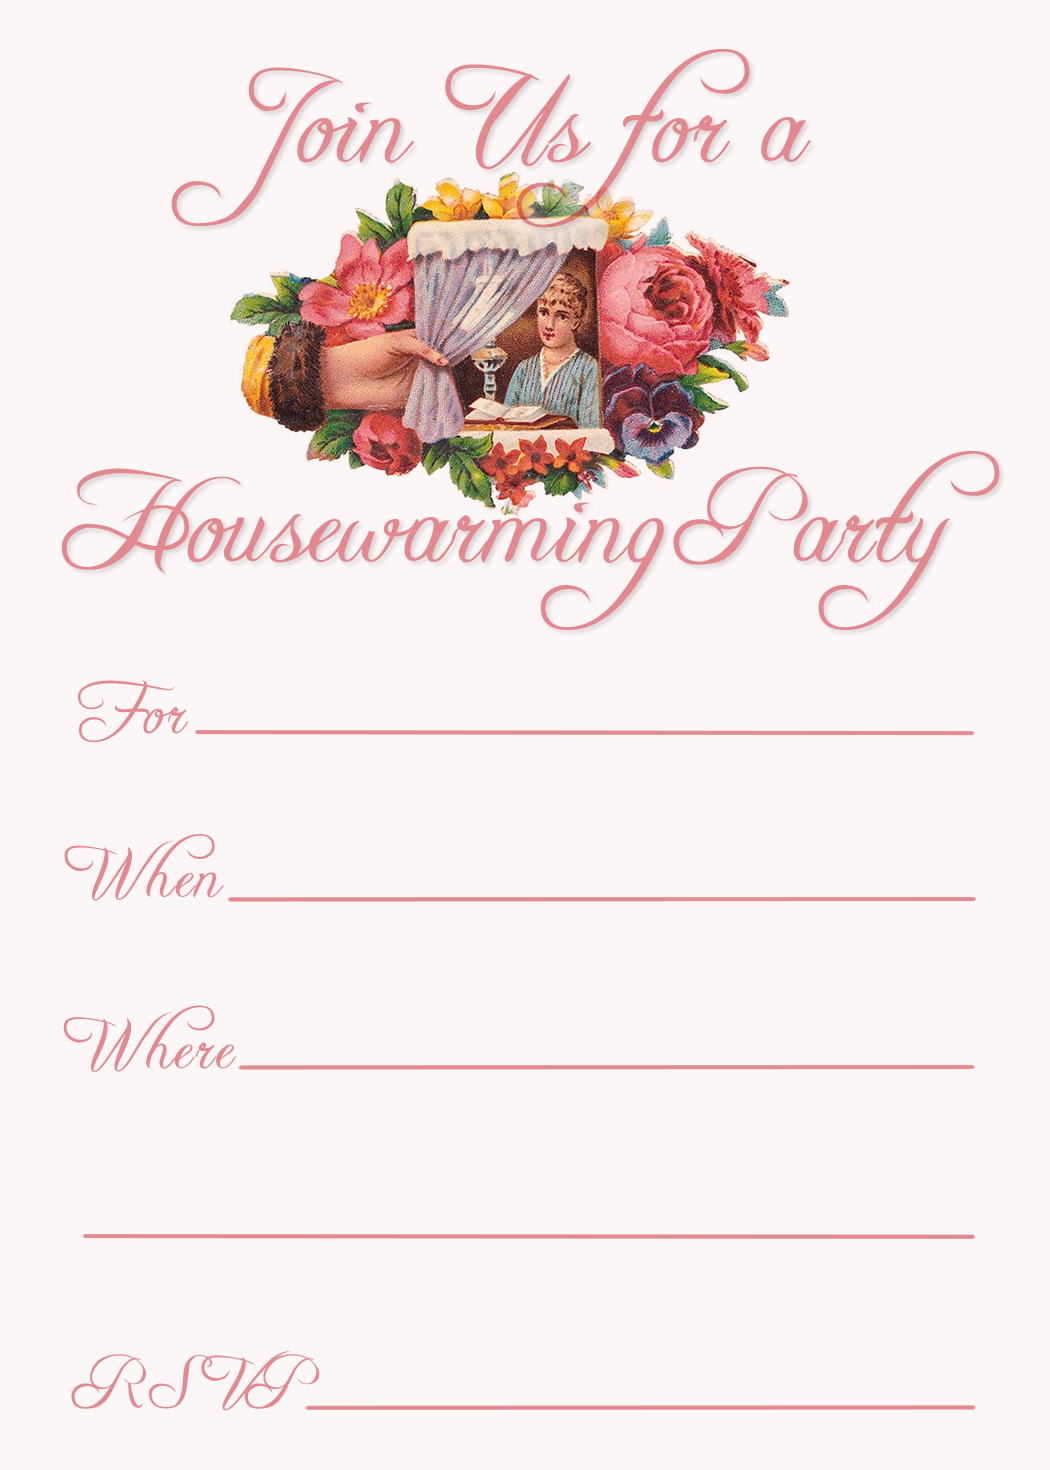 Free Printable Housewarming Party Invitations | Invitation Cards - Free Printable Housewarming Invitations Cards